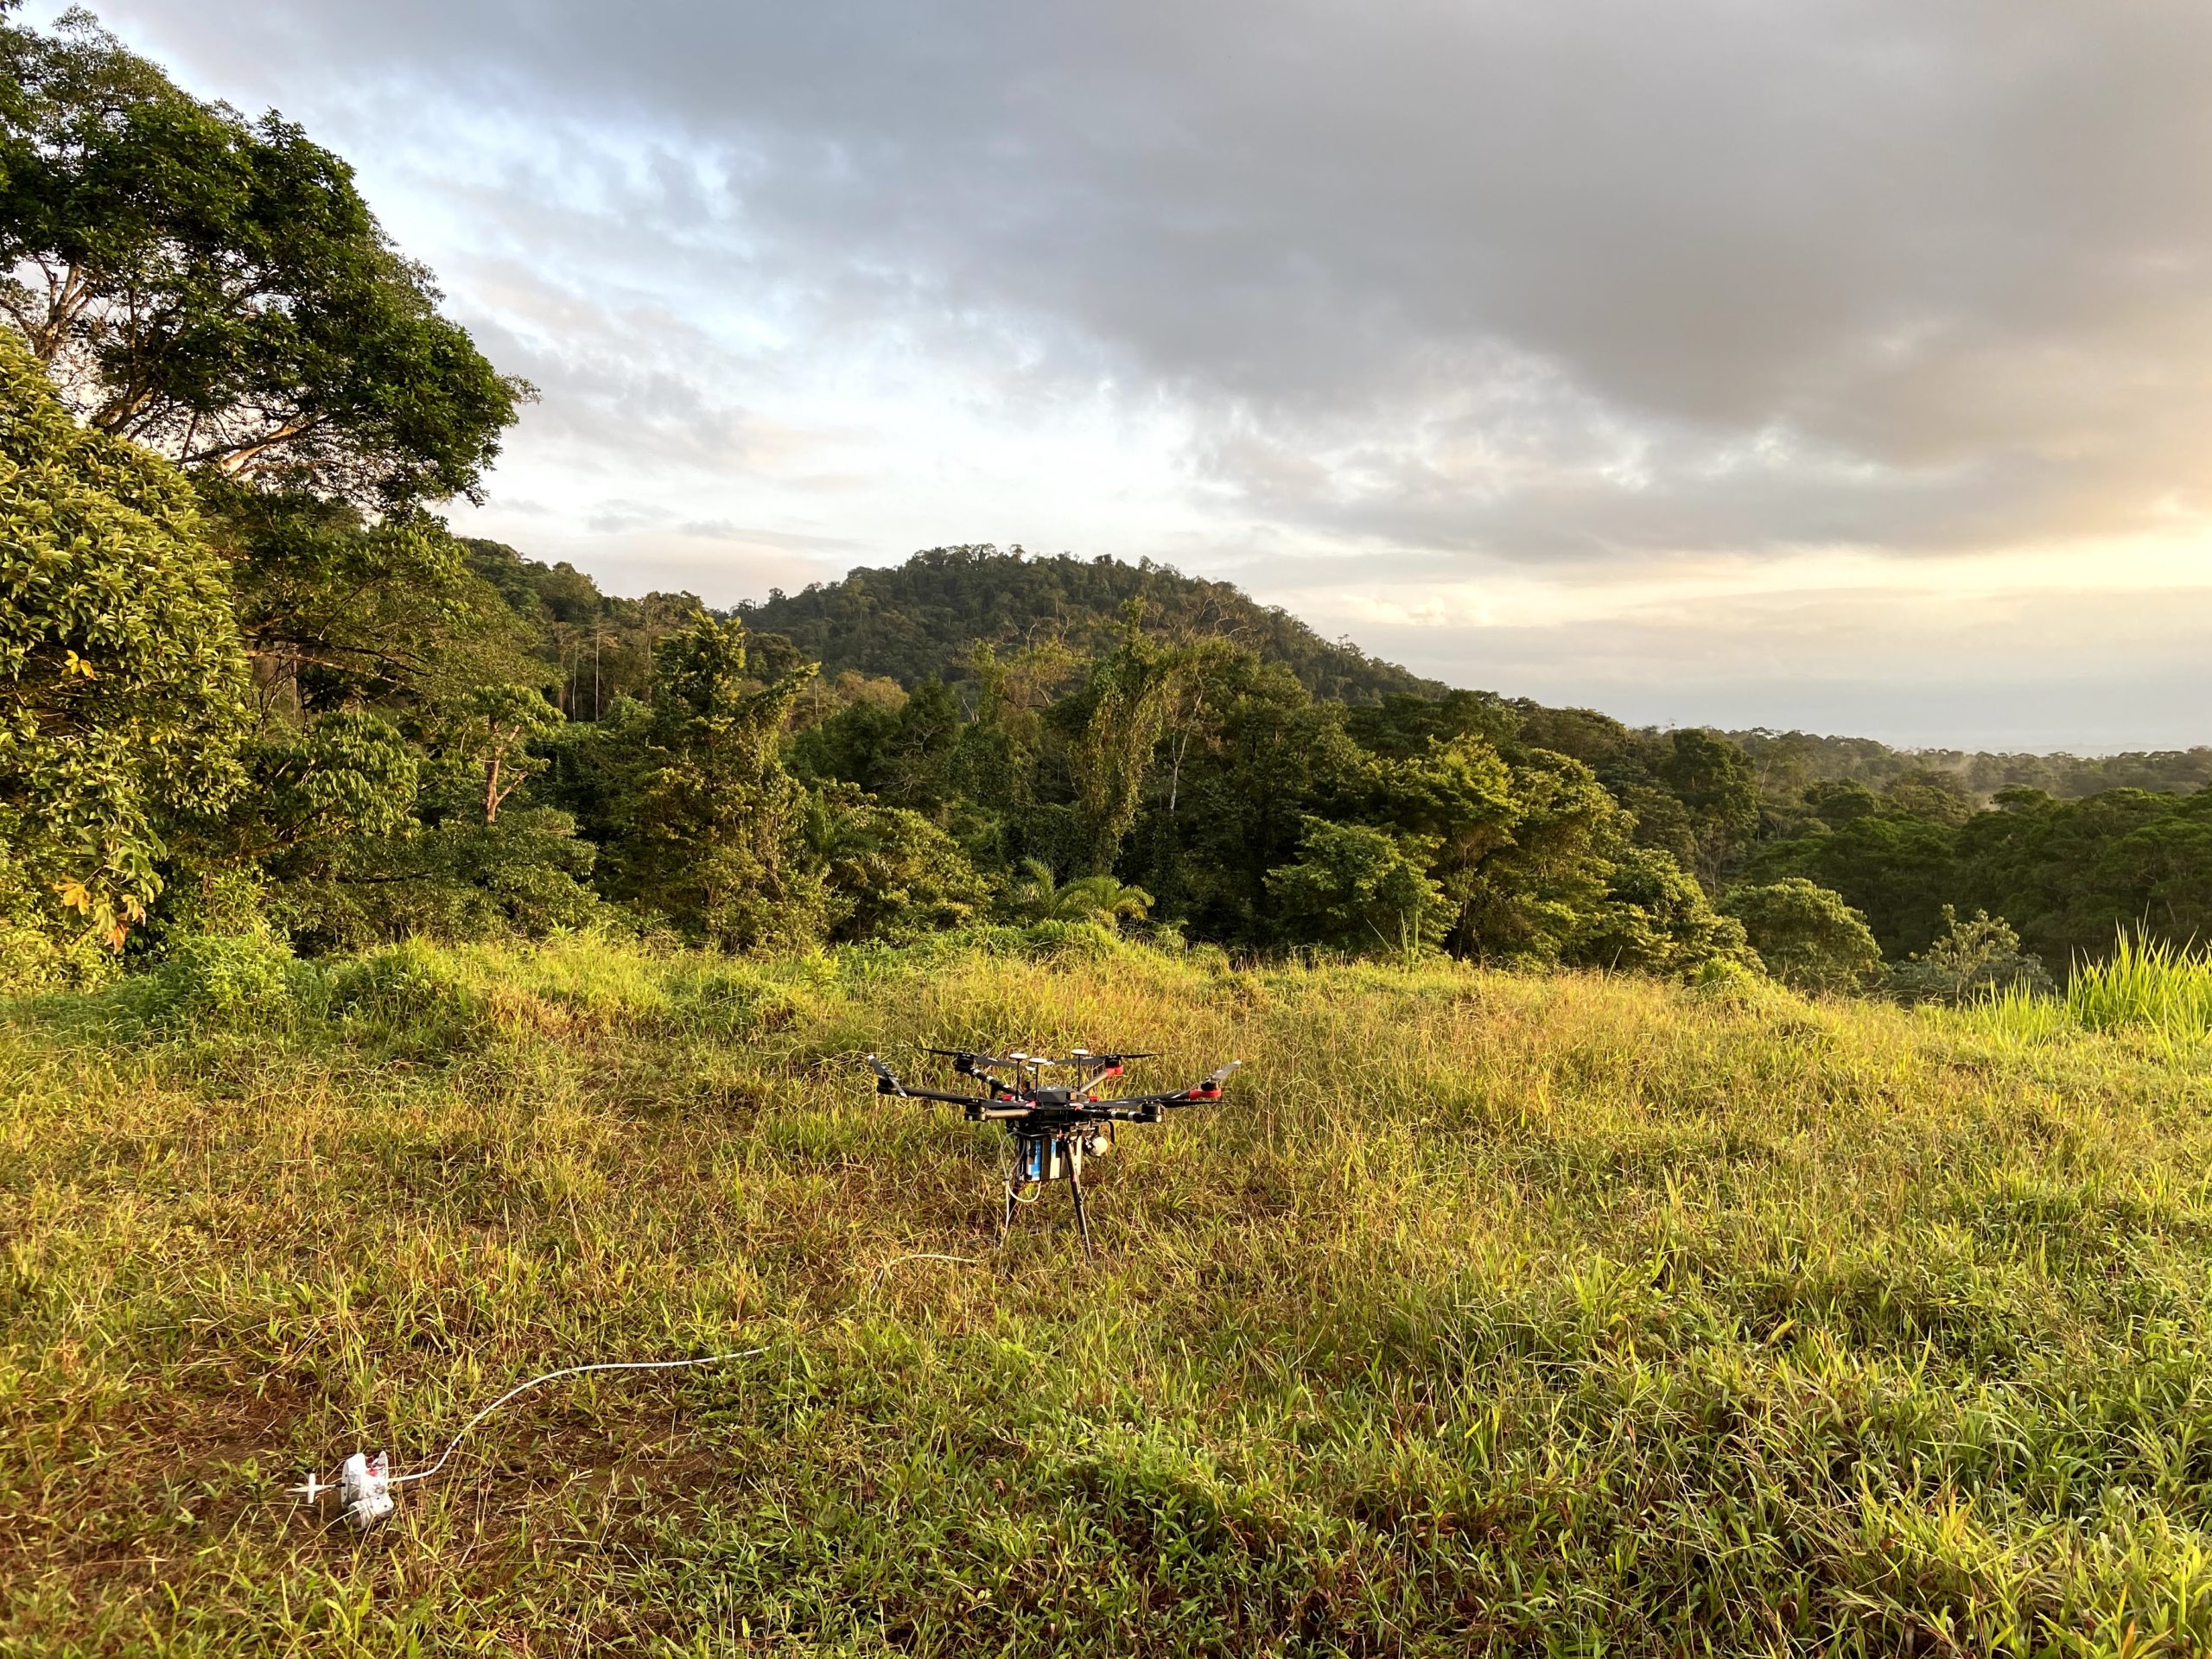 Drone shown ready to launch from a field with rainforest trees and sky in background.